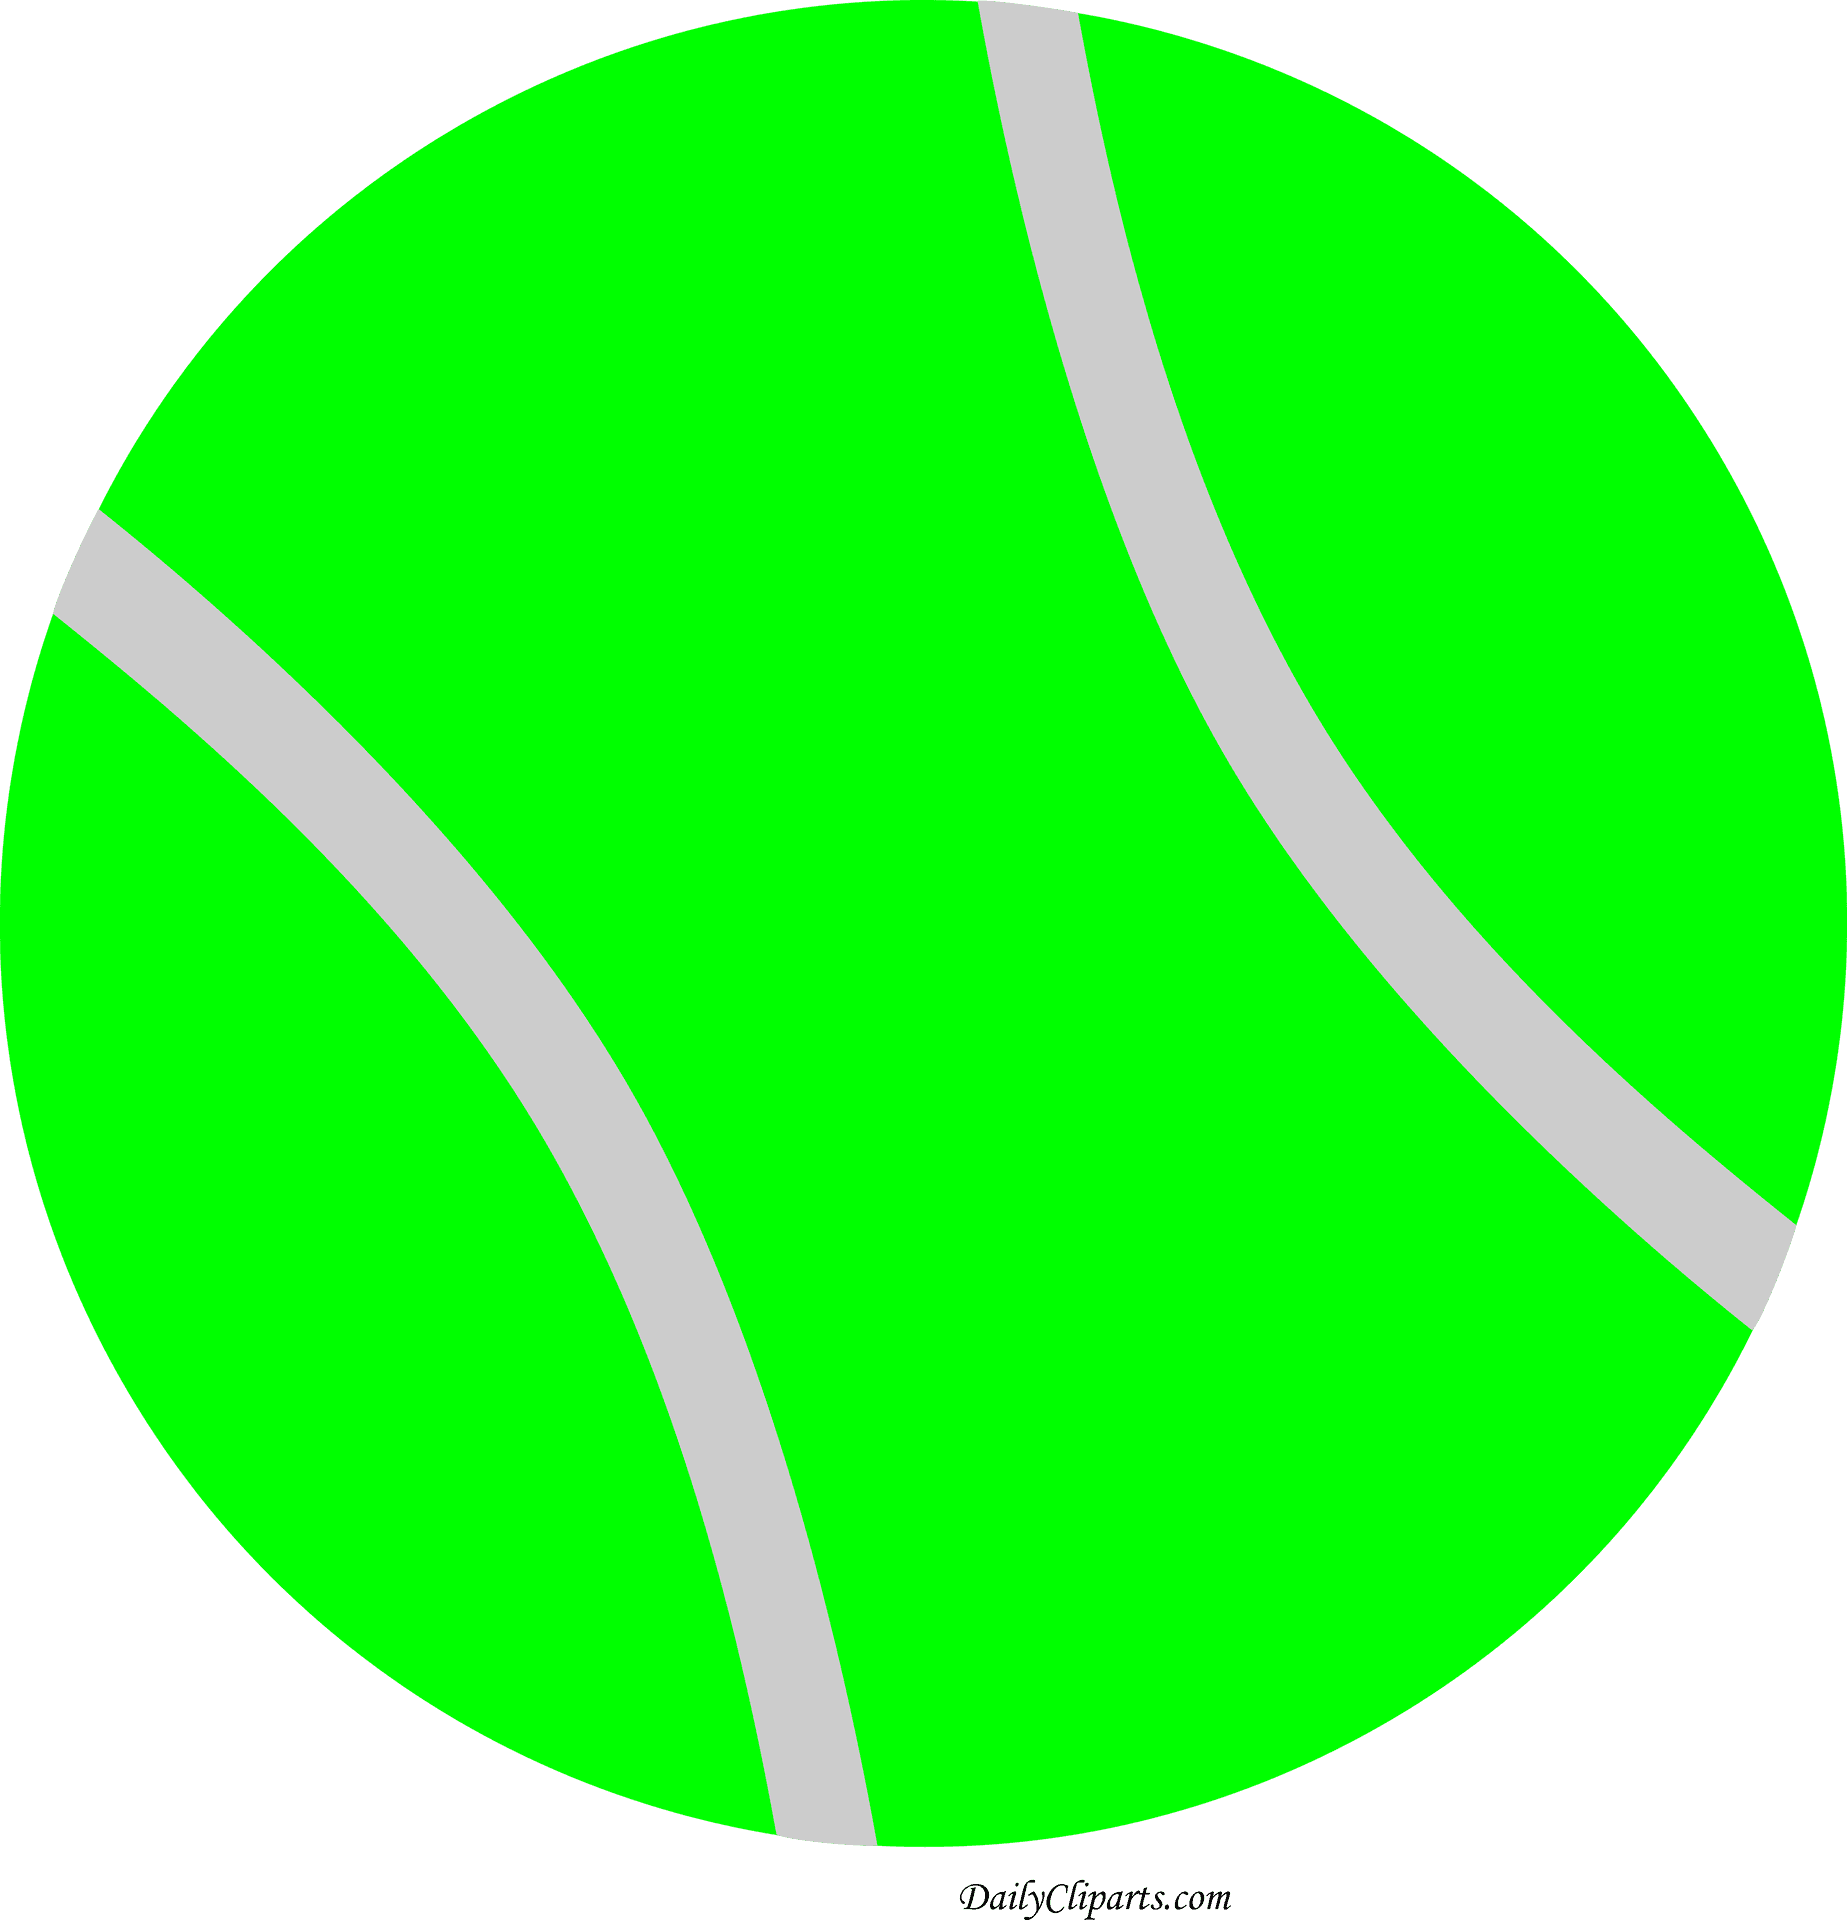 Tennis Ball Close Up Graphic PNG image